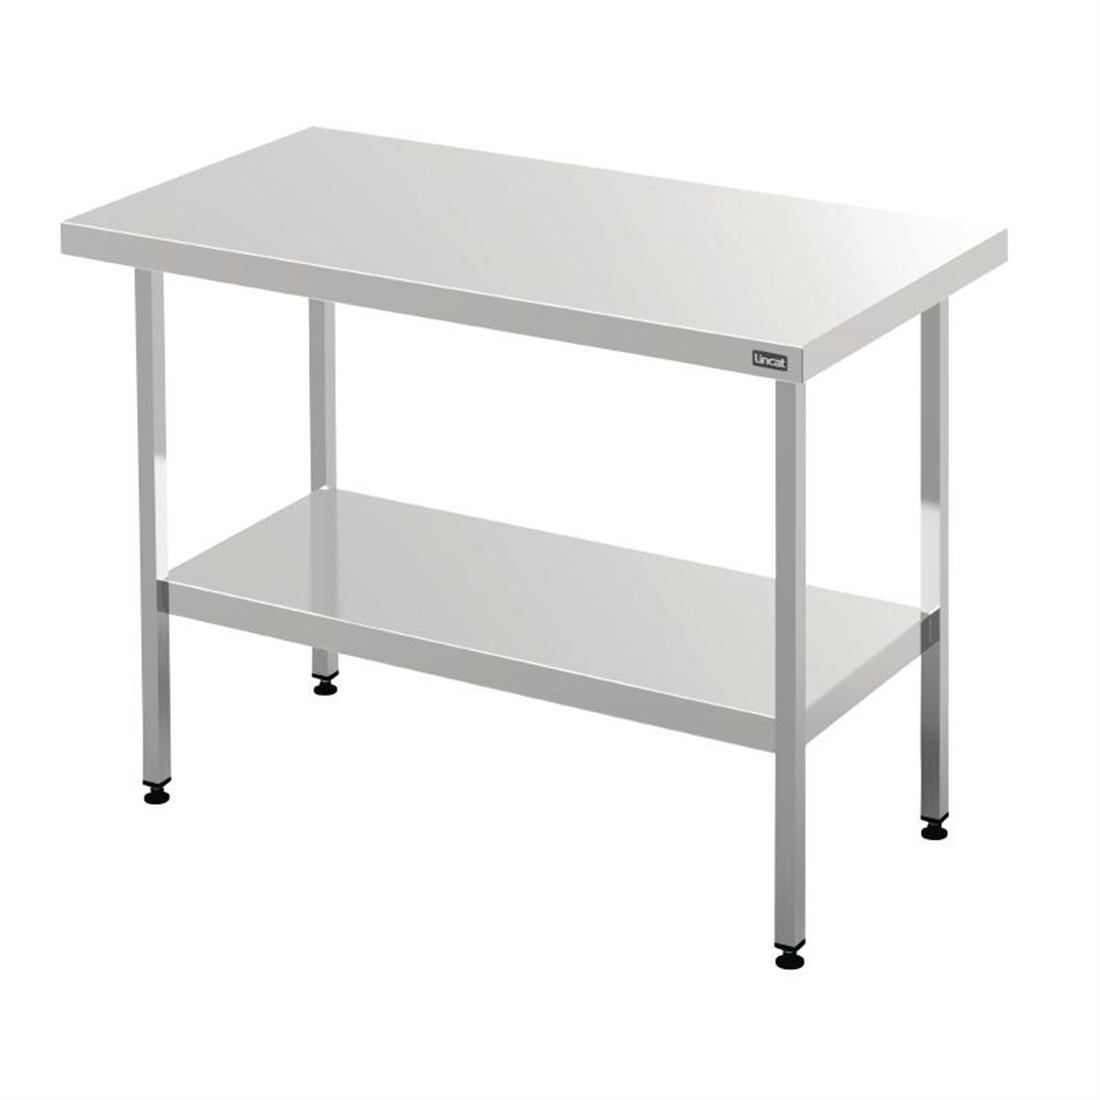 Lincat Stainless Steel Centre Table 1800mm